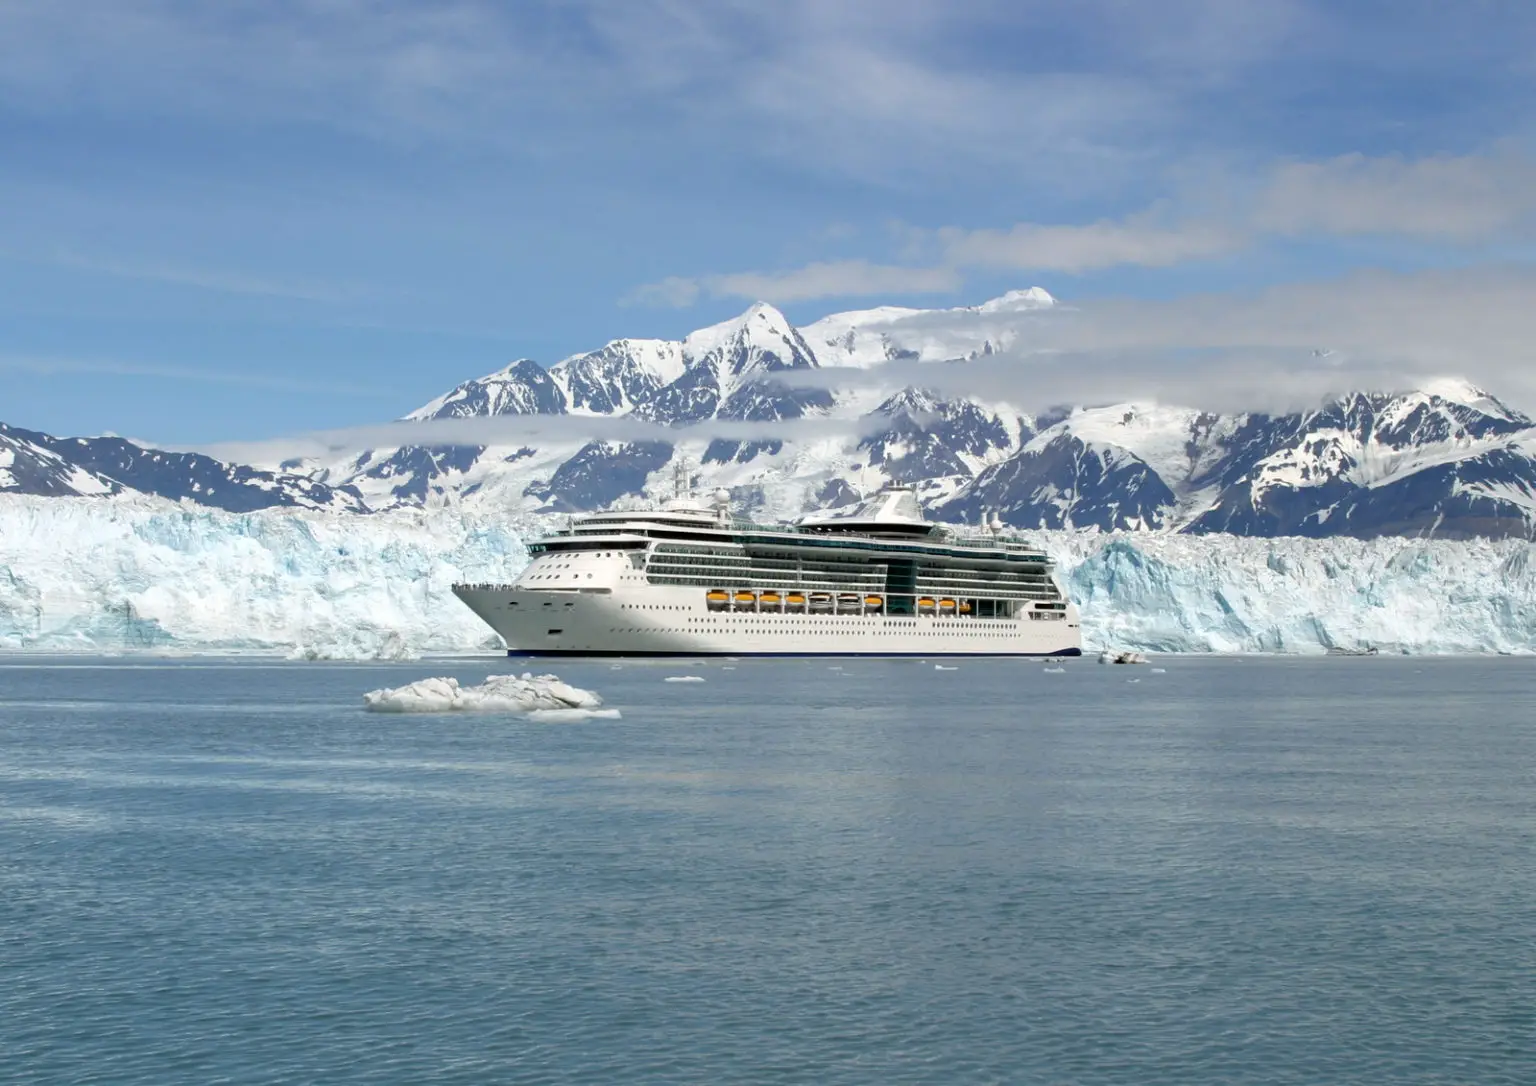 best alaska cruise for 50 year olds